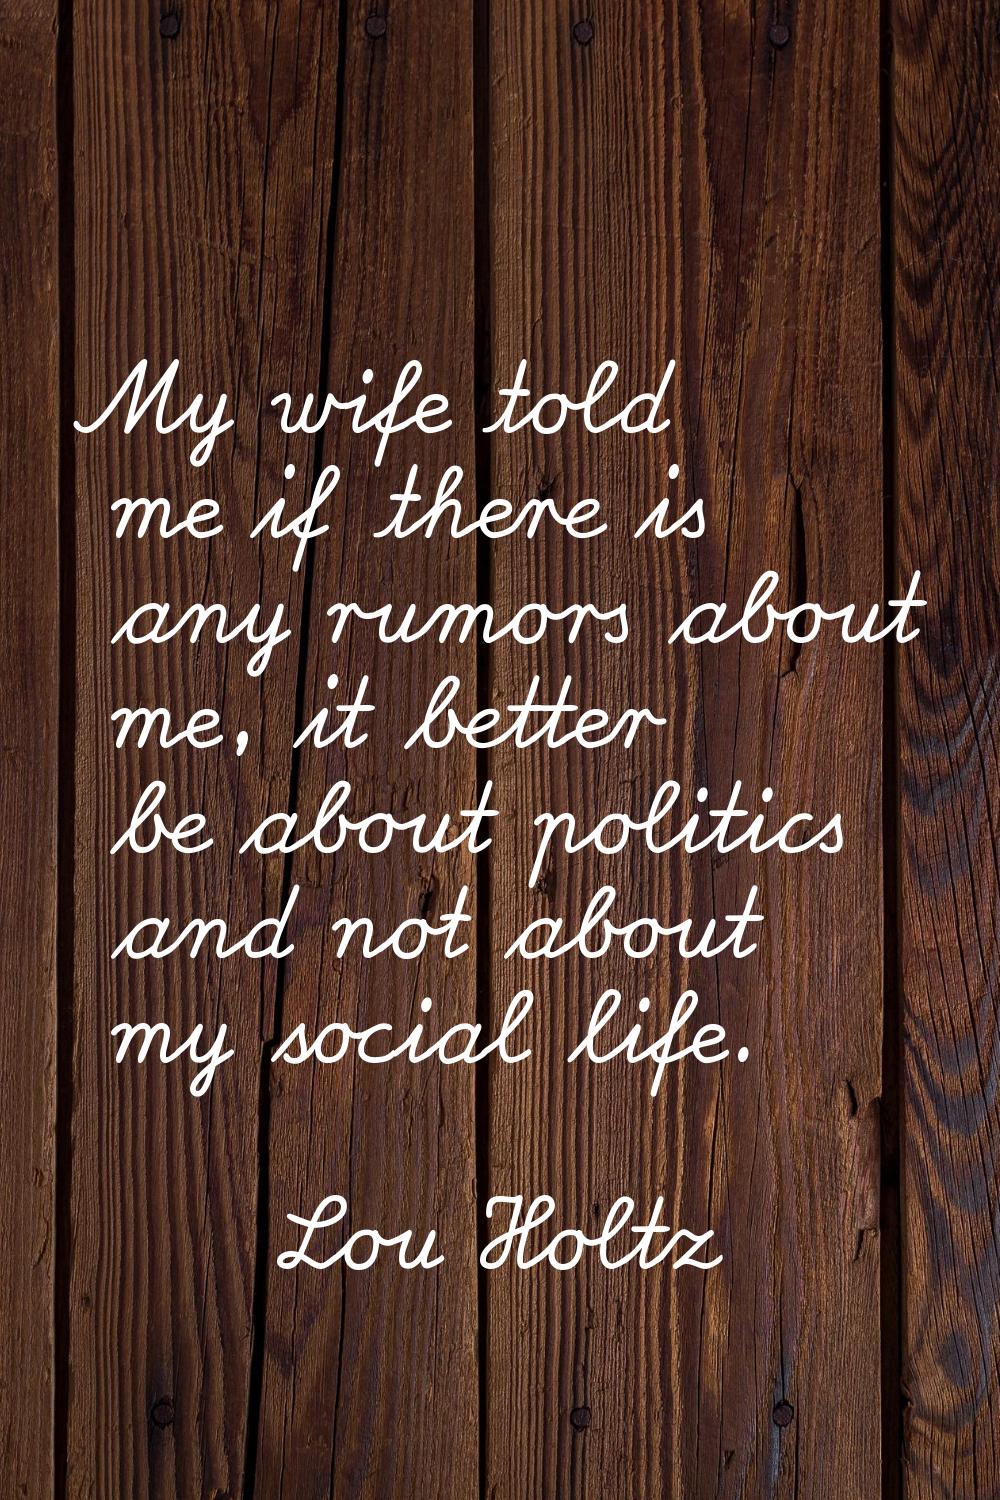 My wife told me if there is any rumors about me, it better be about politics and not about my socia